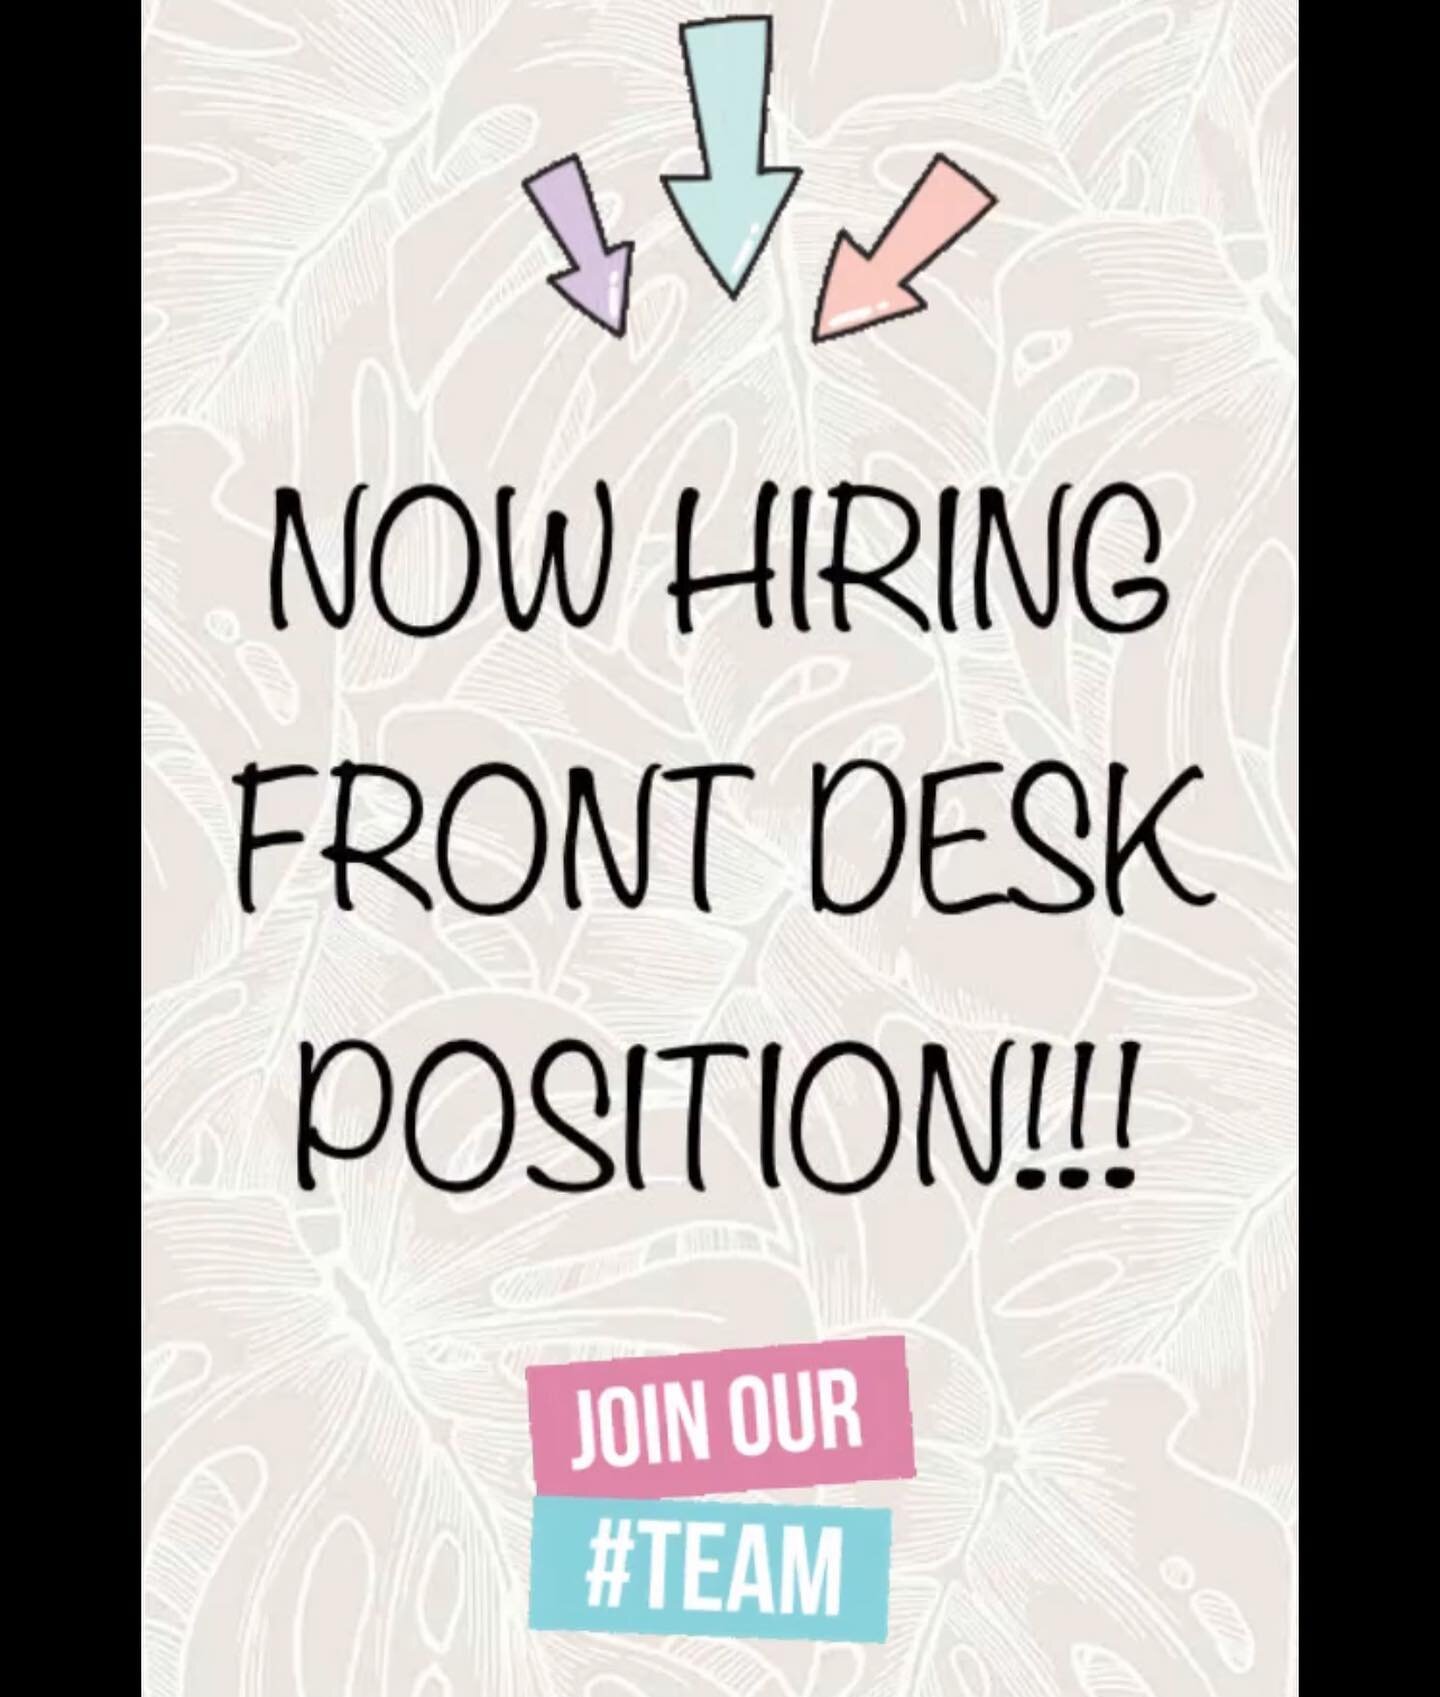 We are actively looking for the perfect fit for a part time front desk position. 
If you are interested please give us a call at 941-752-8010 or you can upload your resume at: 
https://www.shearrituals.com/careers
#career #job #srq #sarasota #bradent